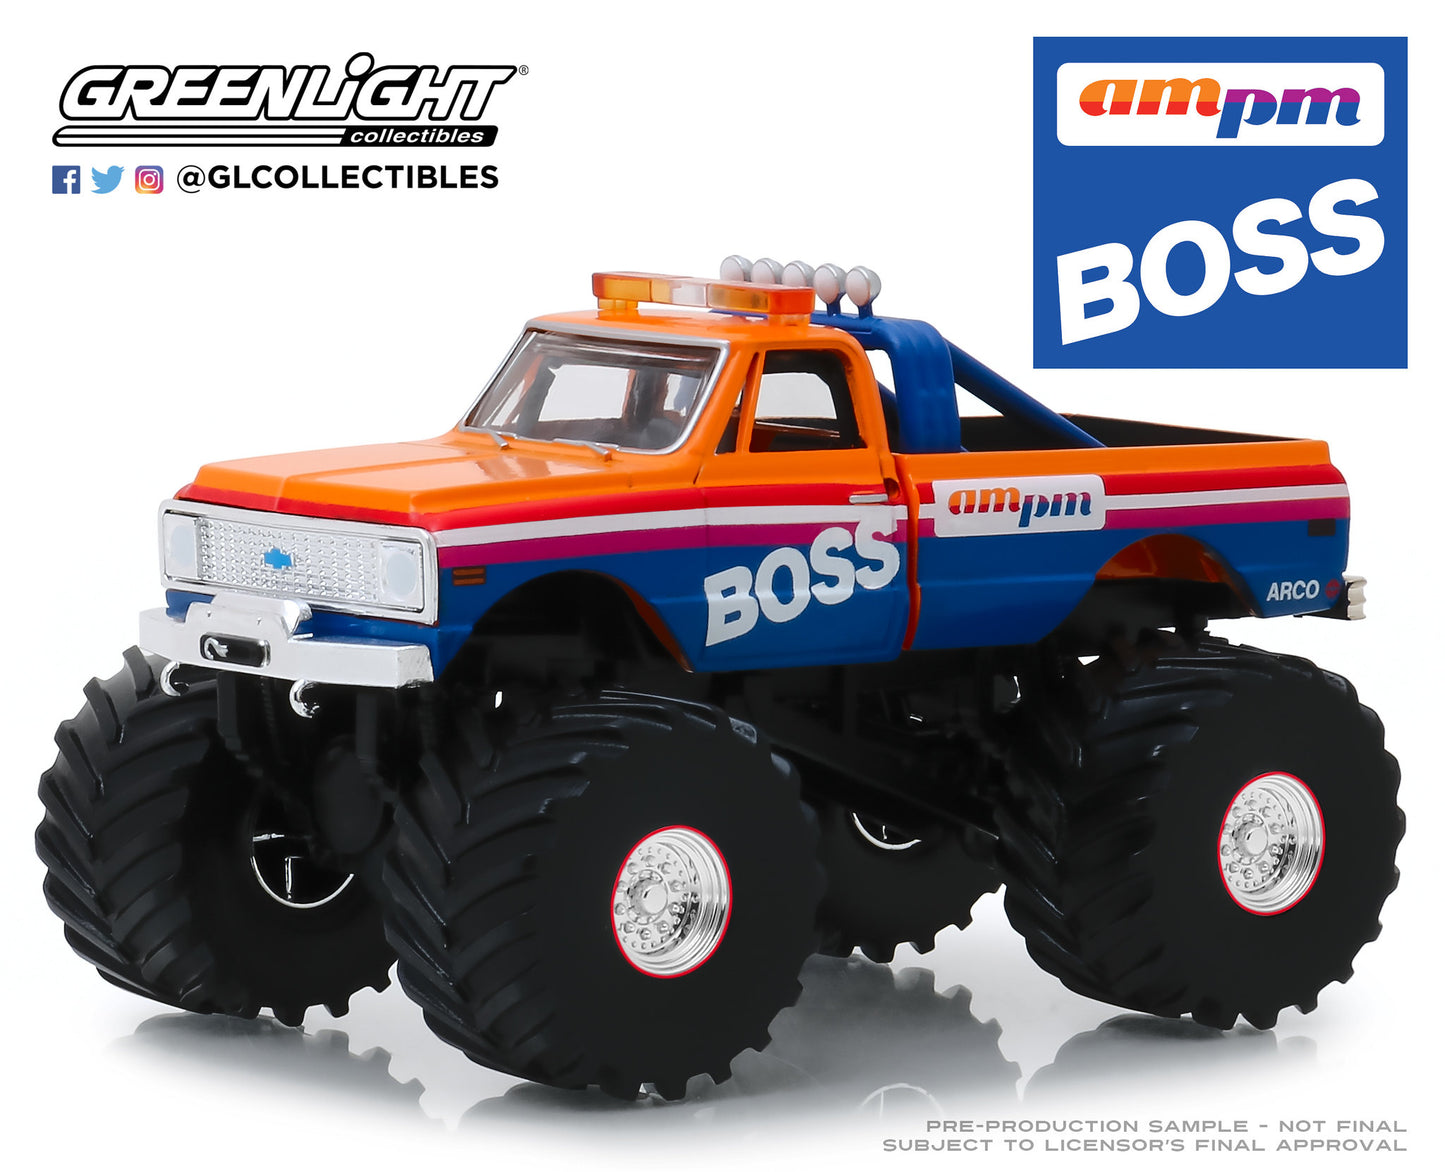 GreenLight 1:43 Kings of Crunch - AM/PM Boss - 1972 Chevrolet K-10 Monster Truck (with 66-Inch Tires) 88021